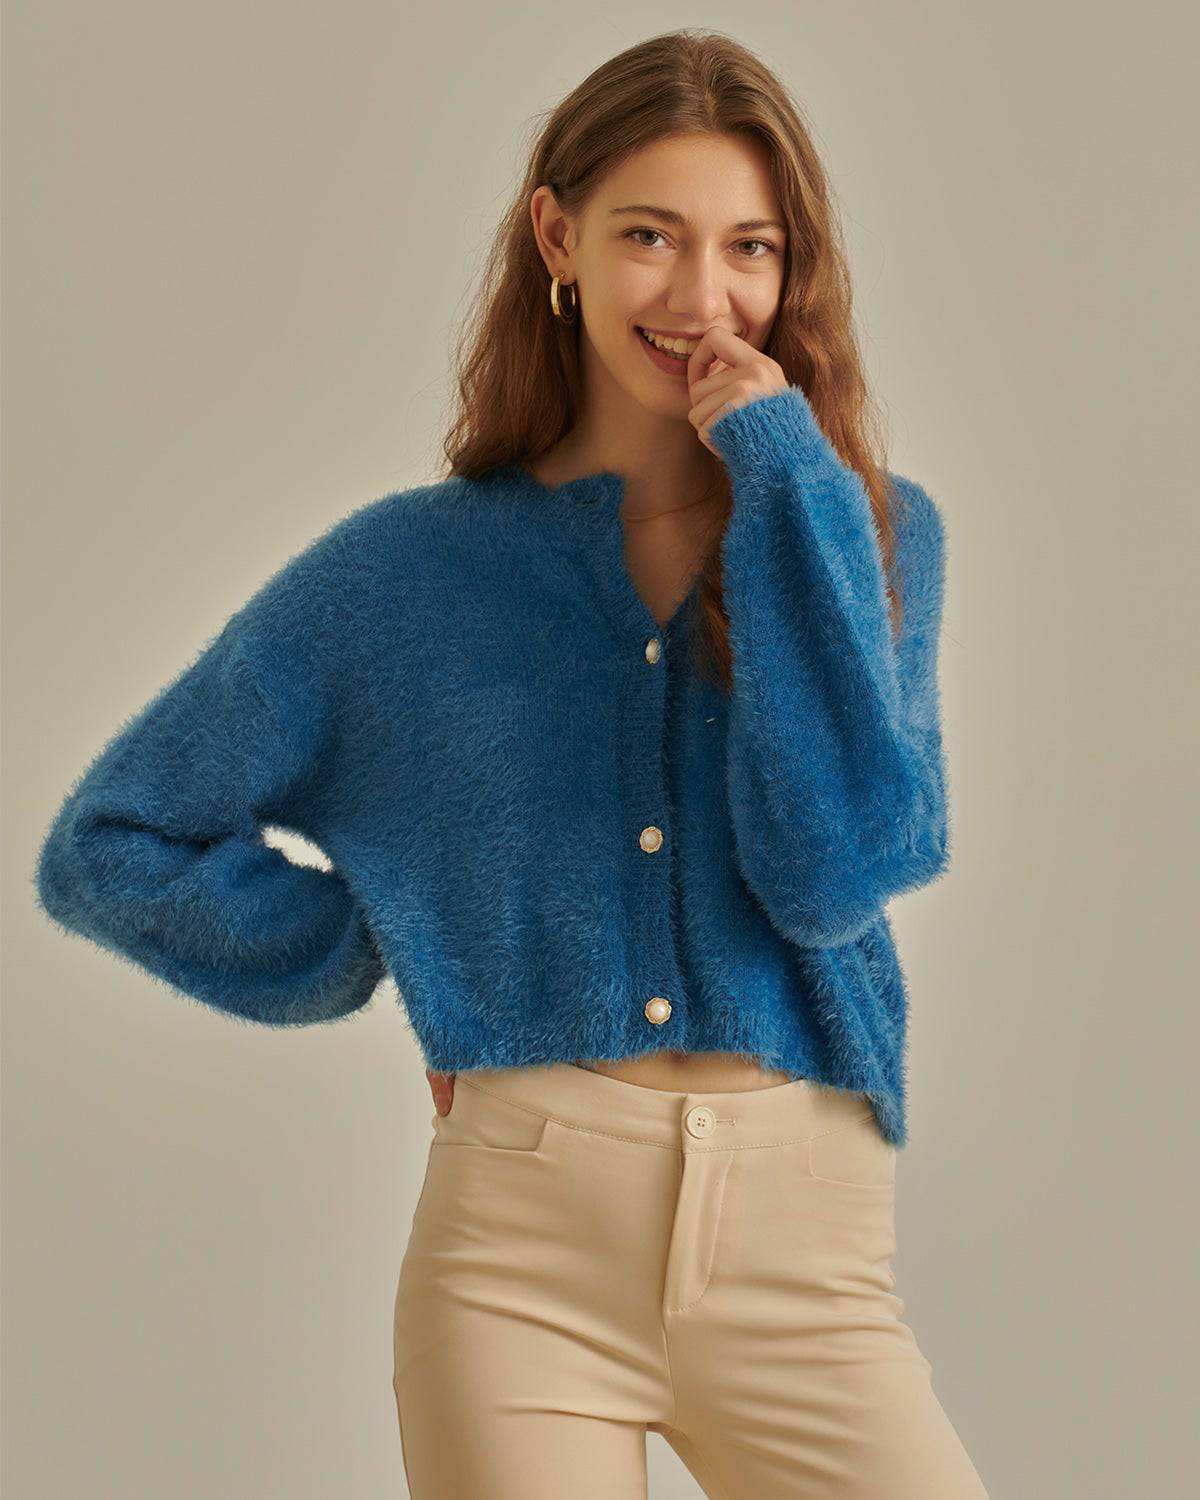 The Lustrous Fluffy Cardigan - Women's Fuzzy Knit Cropped Button